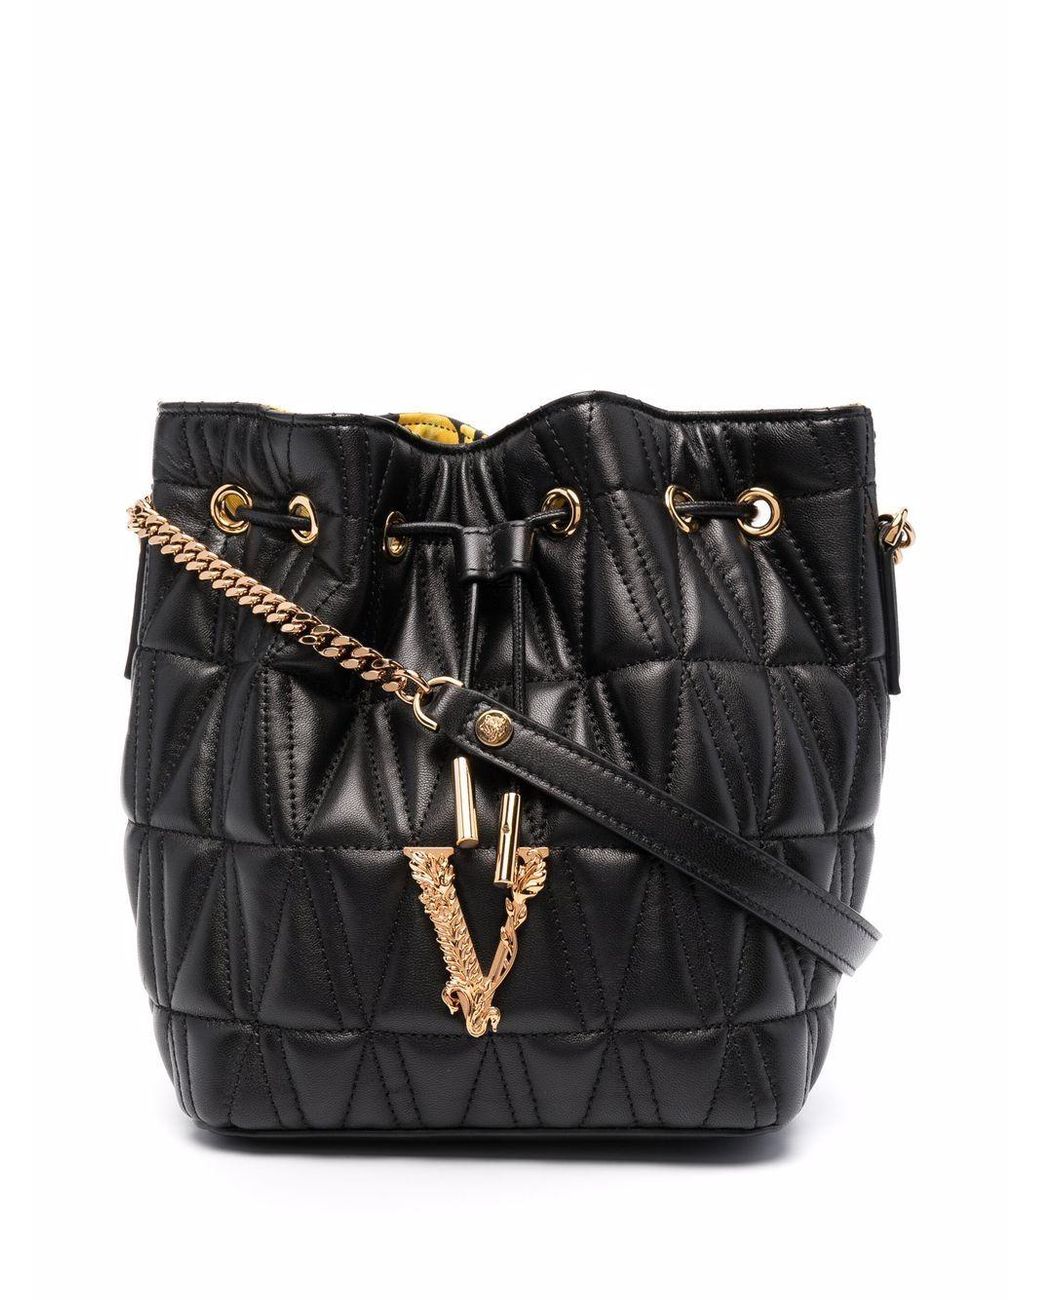 Versace Versus Quilted Leather Crossbody Bag in Black - Lyst